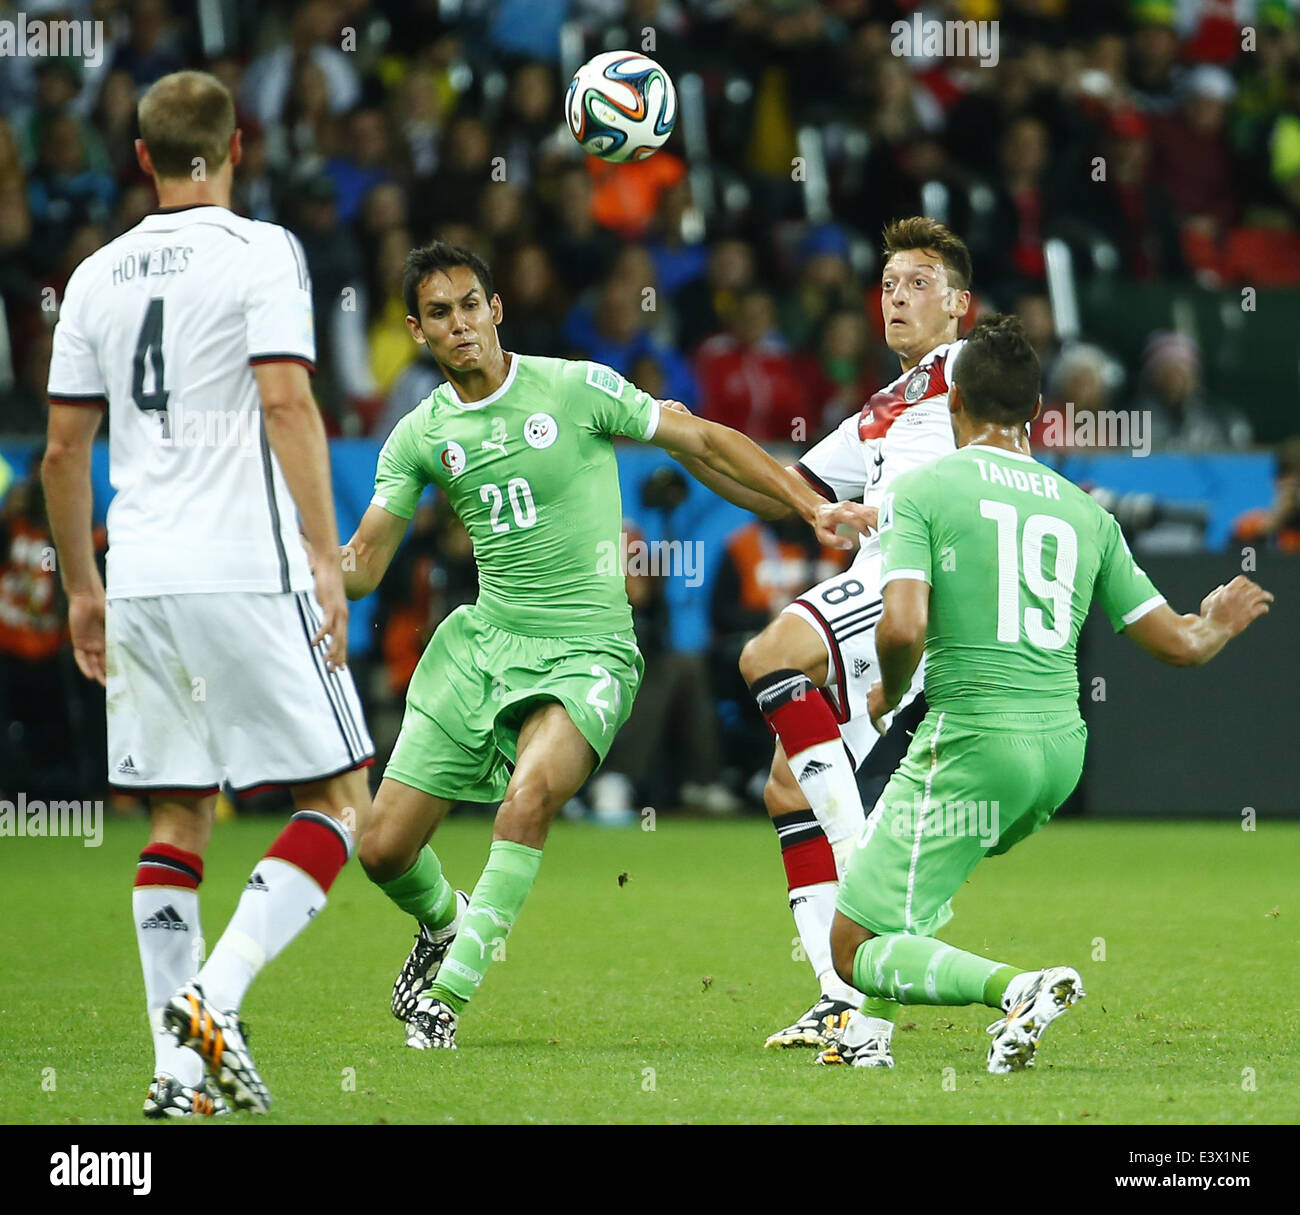 Porto Alegre, Brazil. 30th June, 2014. Germany's Mesut Ozil (2nd R) vies with Algeria's Aissa Mandi (2nd L) during a Round of 16 match between Germany and Algeria of 2014 FIFA World Cup at the Estadio Beira-Rio Stadium in Porto Alegre, Brazil, on June 30, 2014. Credit:  Chen Jianli/Xinhua/Alamy Live News Stock Photo